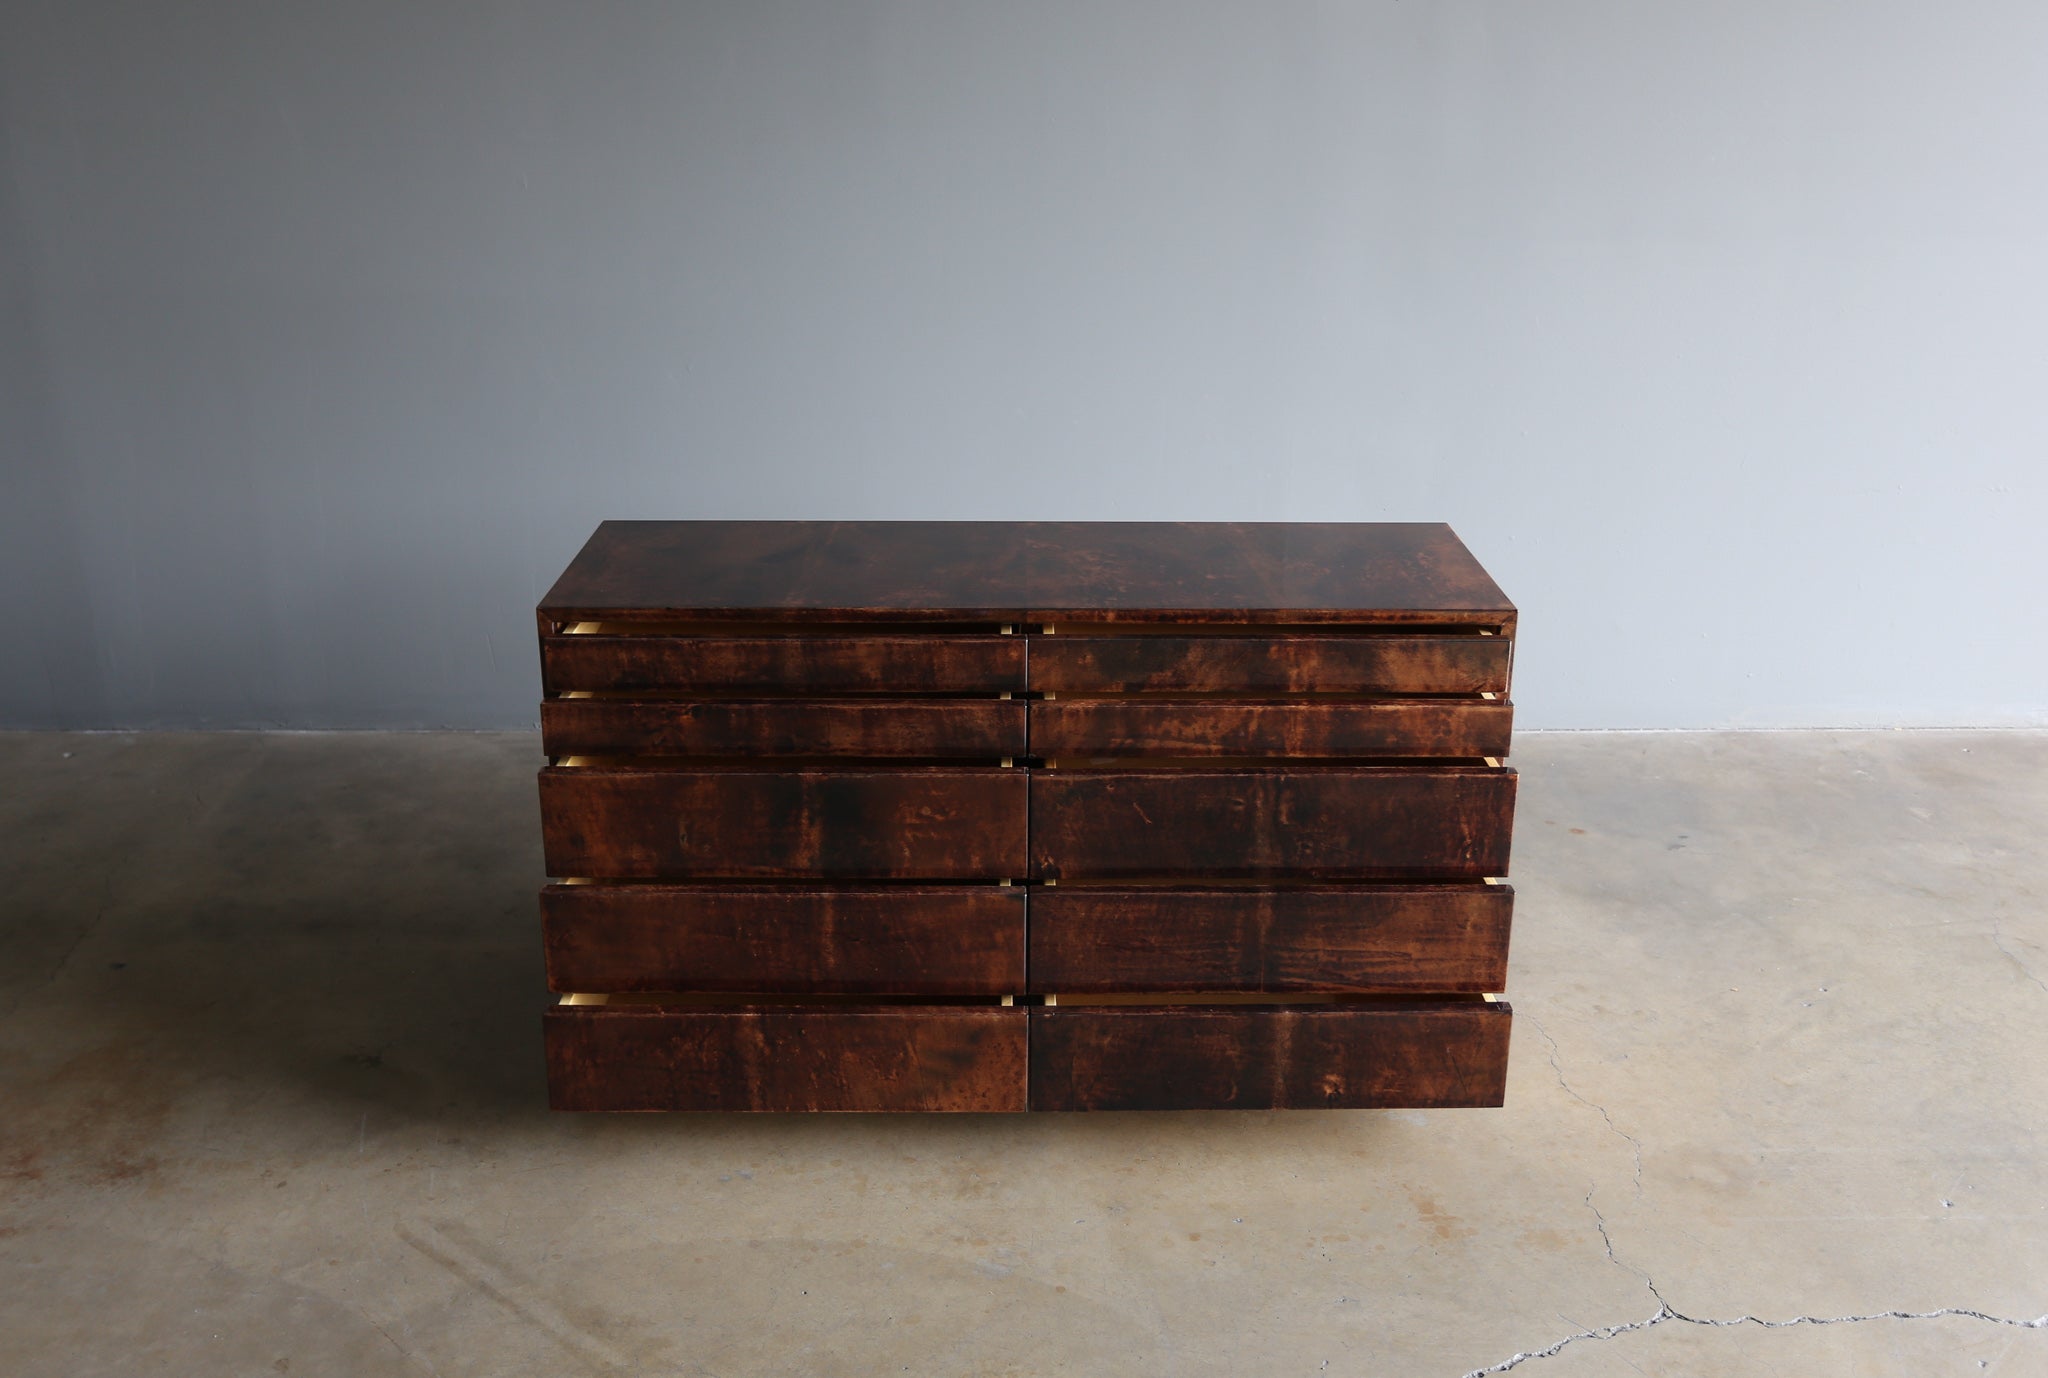 = SOLD = Aldo Tura Lacquered Goat Skin Chest of Drawers, Circa 1970